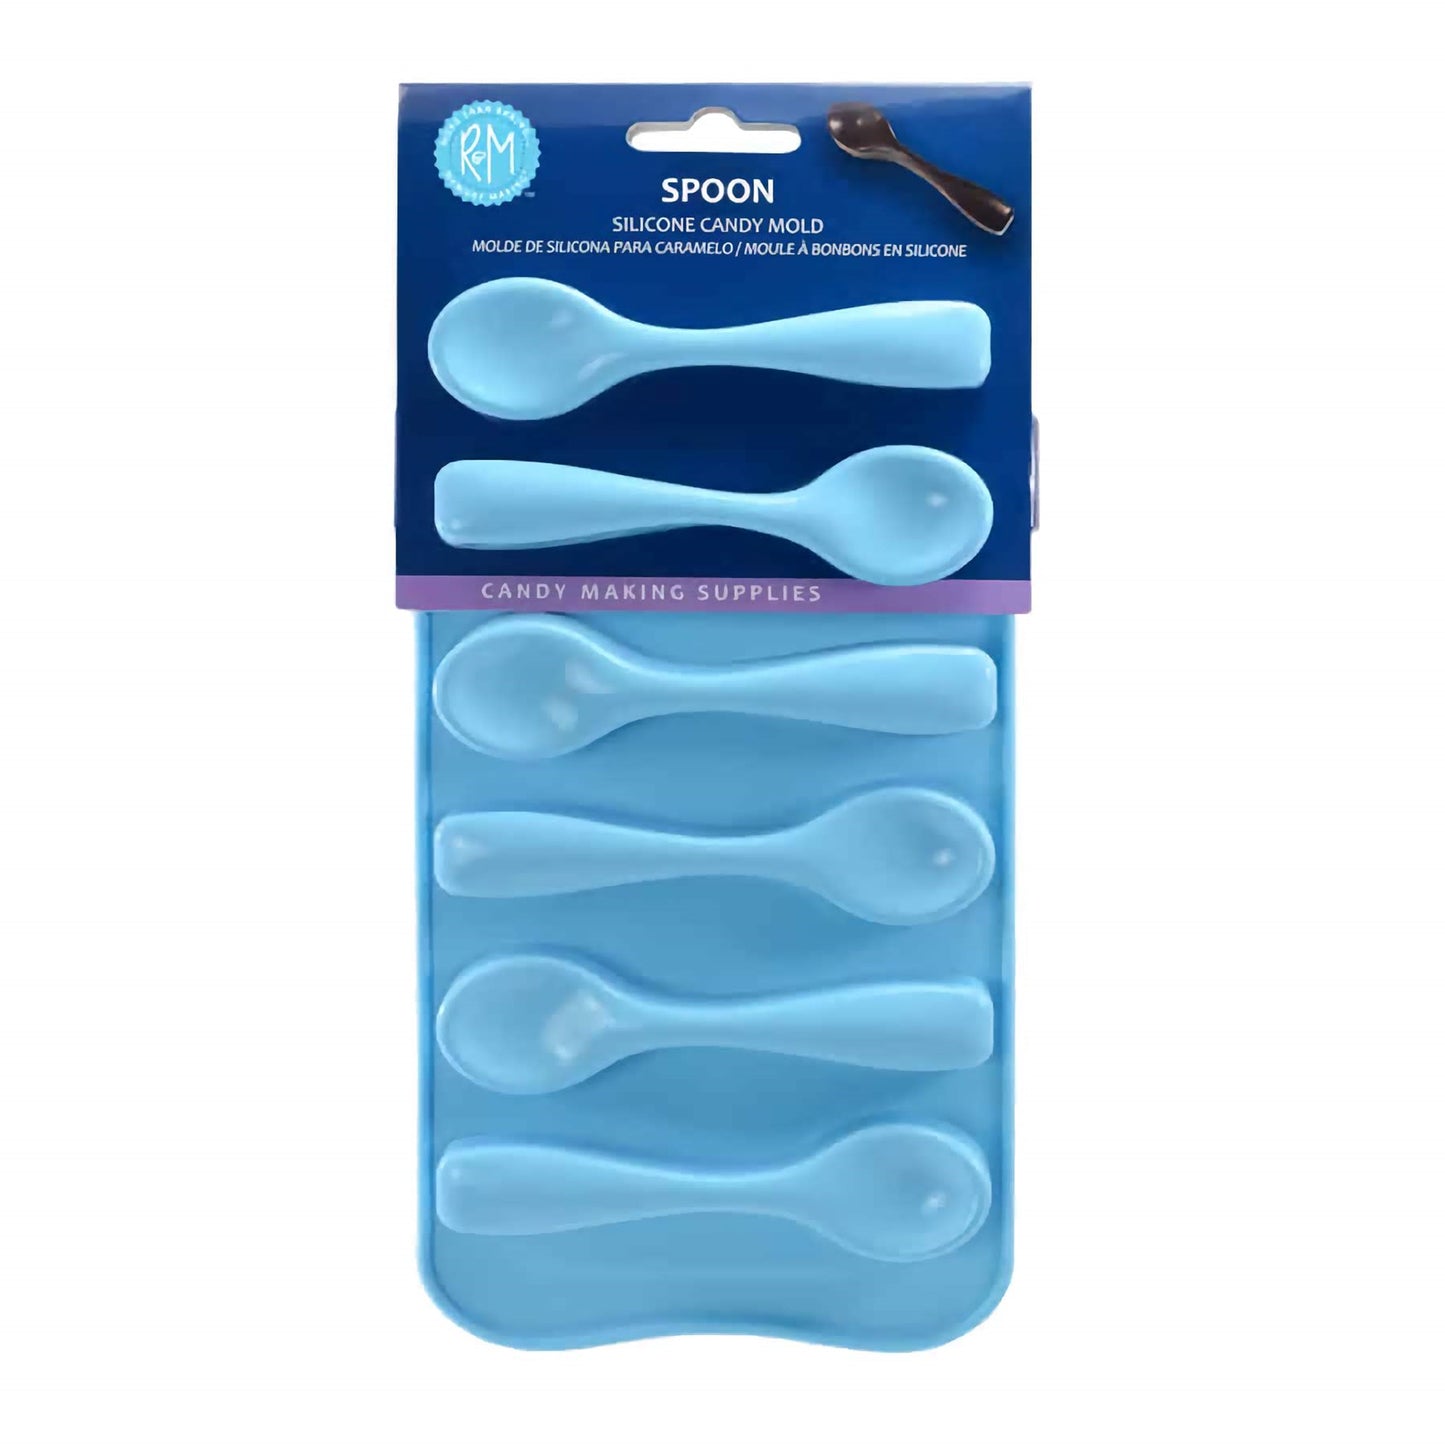 Packaging view of a blue silicone chocolate spoon mold by RM, designed for candy making. The mold is displayed in its original packaging which includes a clear window showcasing the spoon shapes and a label at the top indicating it as a silicone candy mold for making chocolate spoons. The package branding includes 'Candy Making Supplies' with a depiction of a finished chocolate spoon to suggest the end product.